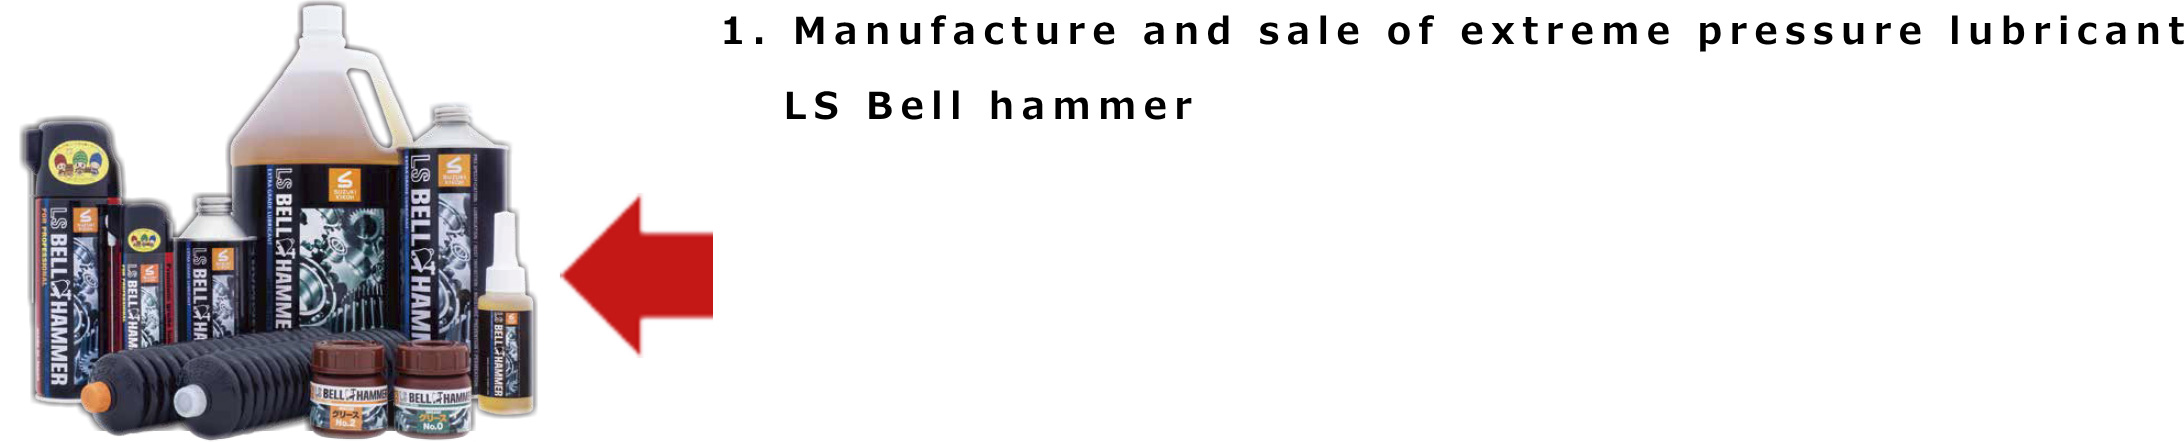 1. Manufactures and sale of extreme pressure lubricant LS Bell hammer